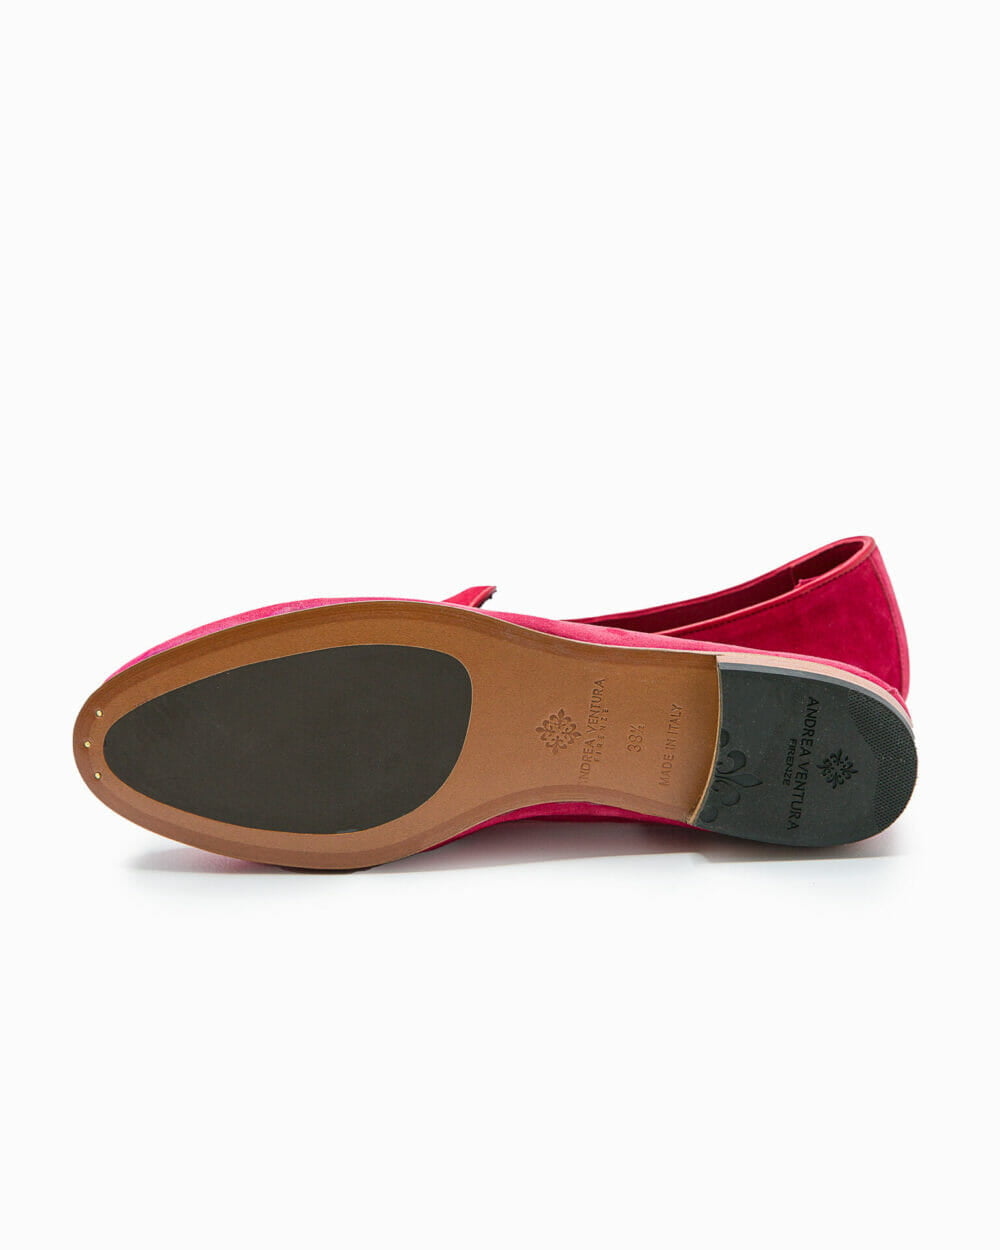 Belgian-d-ls-ruby-red-suede-sole-bottom